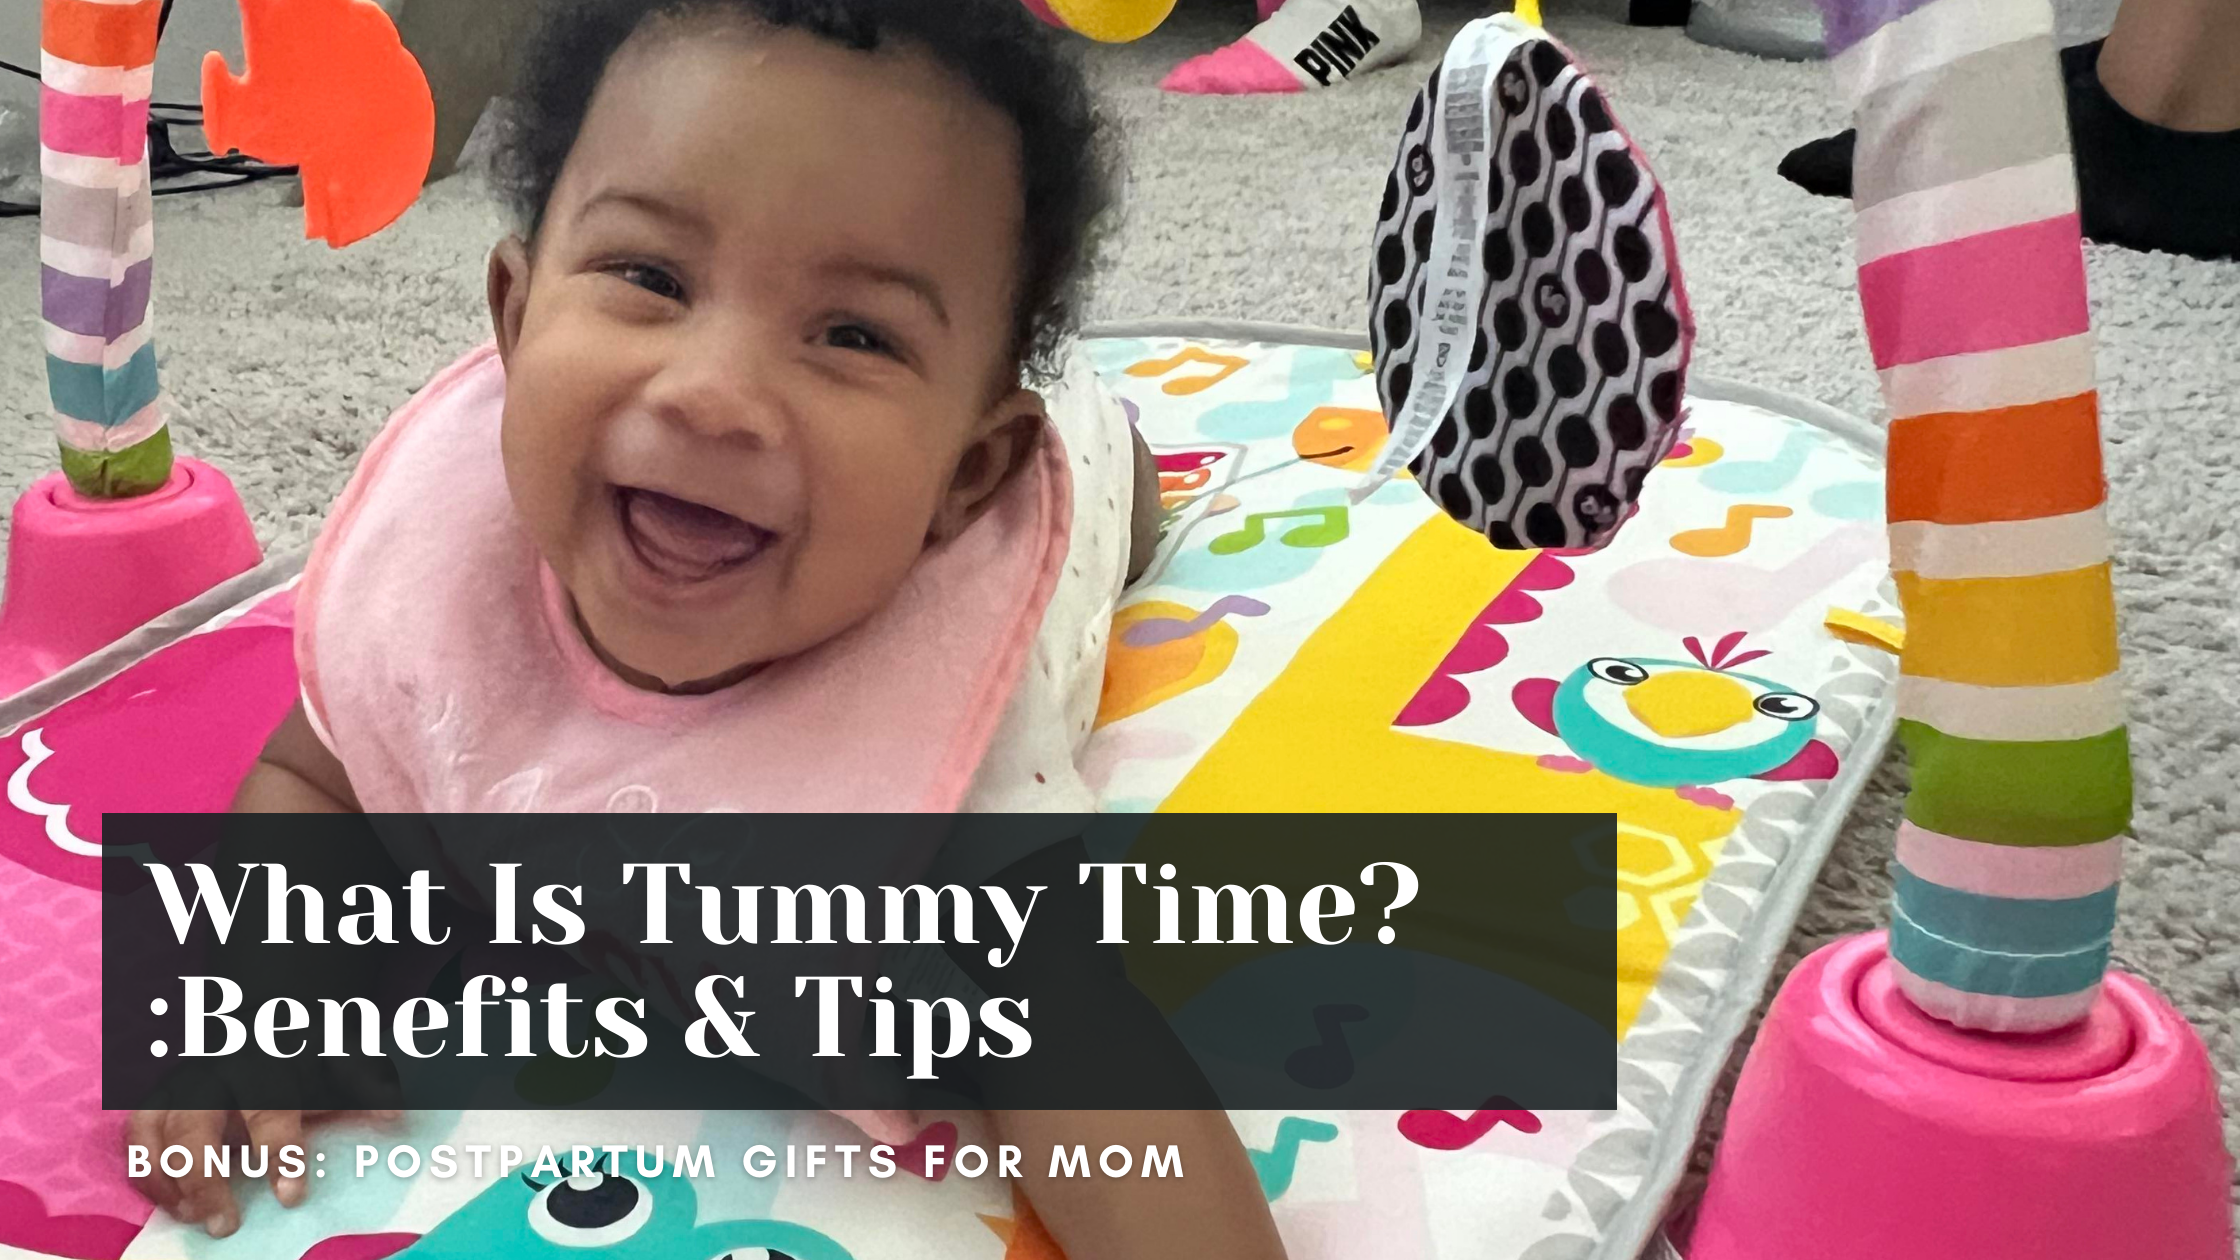 Tummy Time: When To Start, What To Do, How It Helps